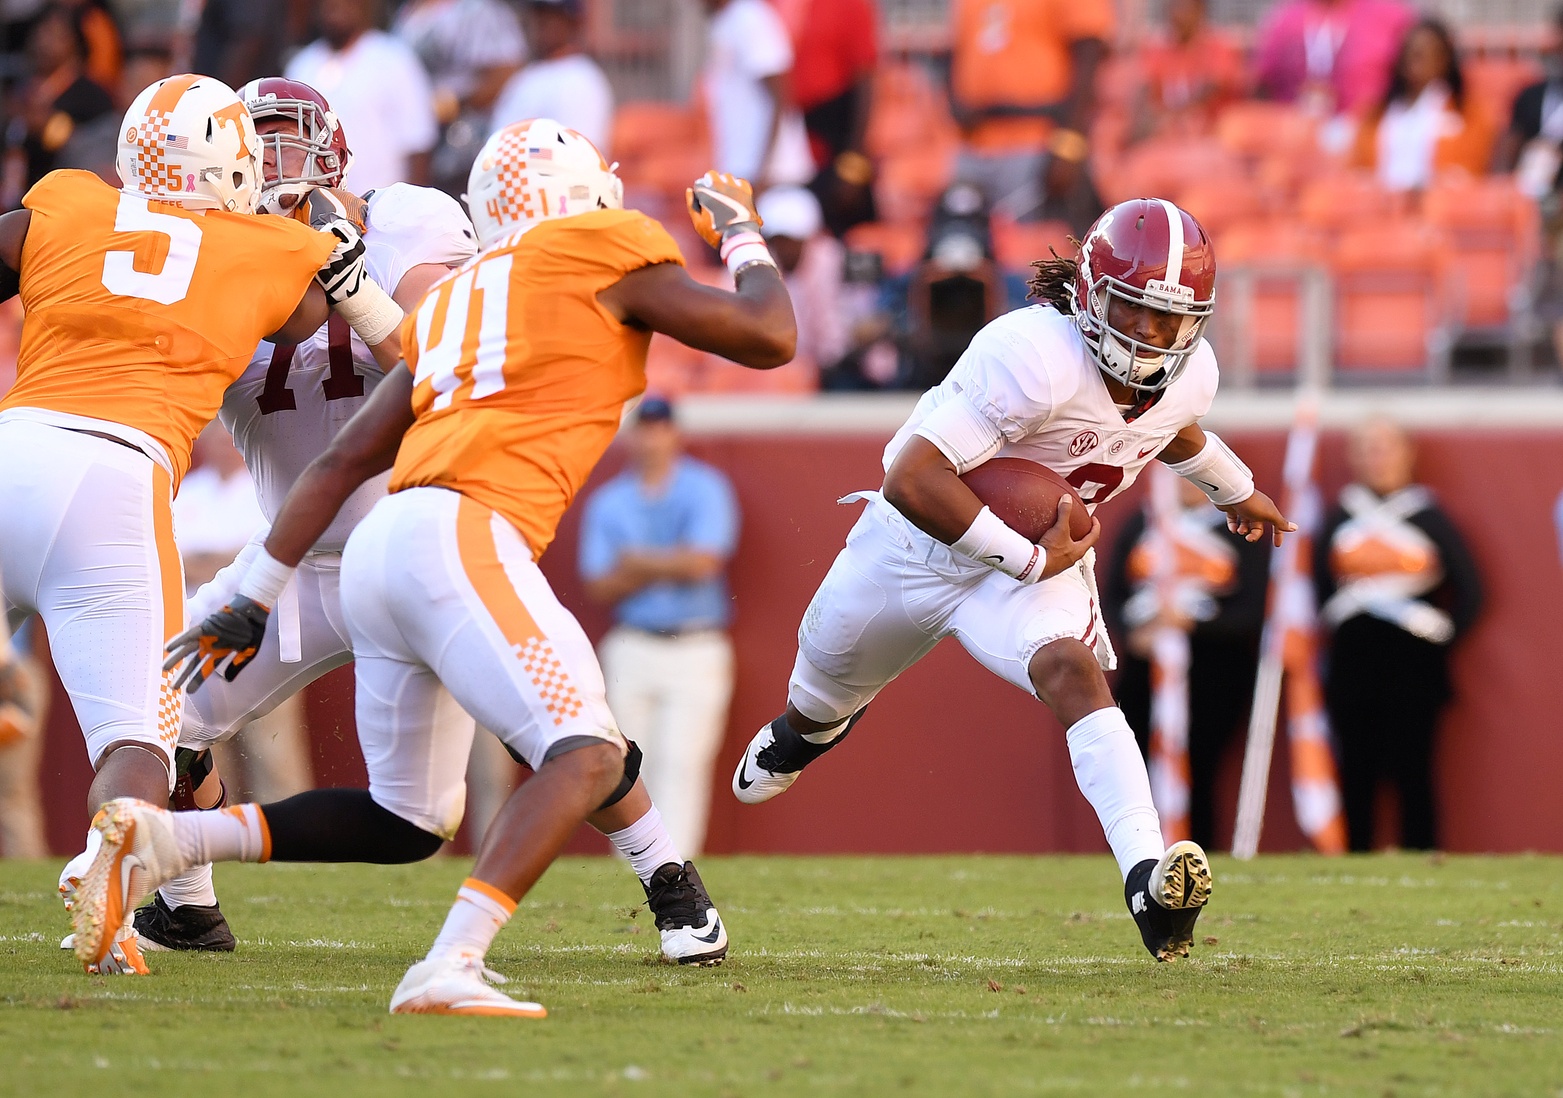 Oct 15, 2016; Knoxville, TN, USA; Alabama Crimson Tide quarterback Jalen Hurts (2) carries up the field against the Tennessee Volunteers during the second quarter at Neyland Stadium. Mandatory Credit: John David Mercer-USA TODAY Sports